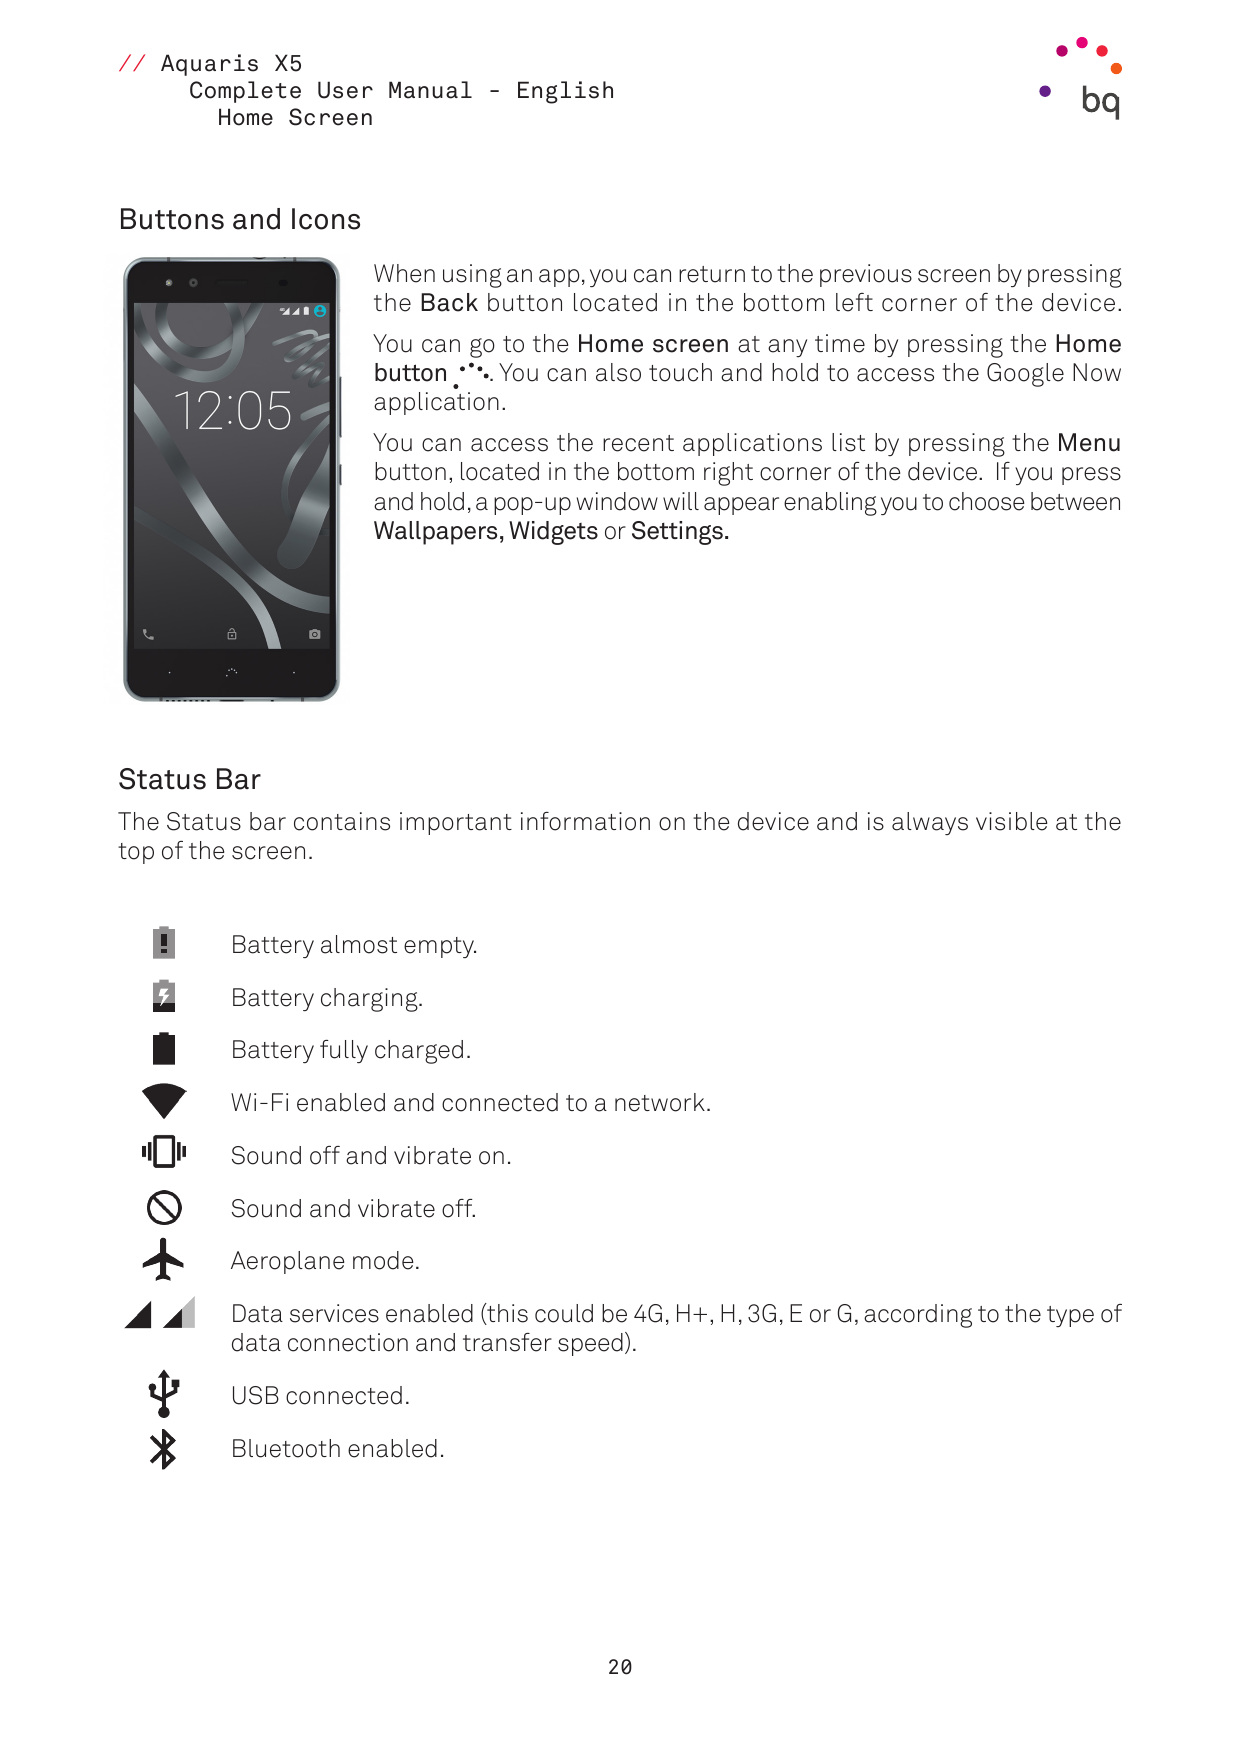 // Aquaris X5Complete User Manual - EnglishHome ScreenButtons and IconsWhen using an app, you can return to the previous screen 